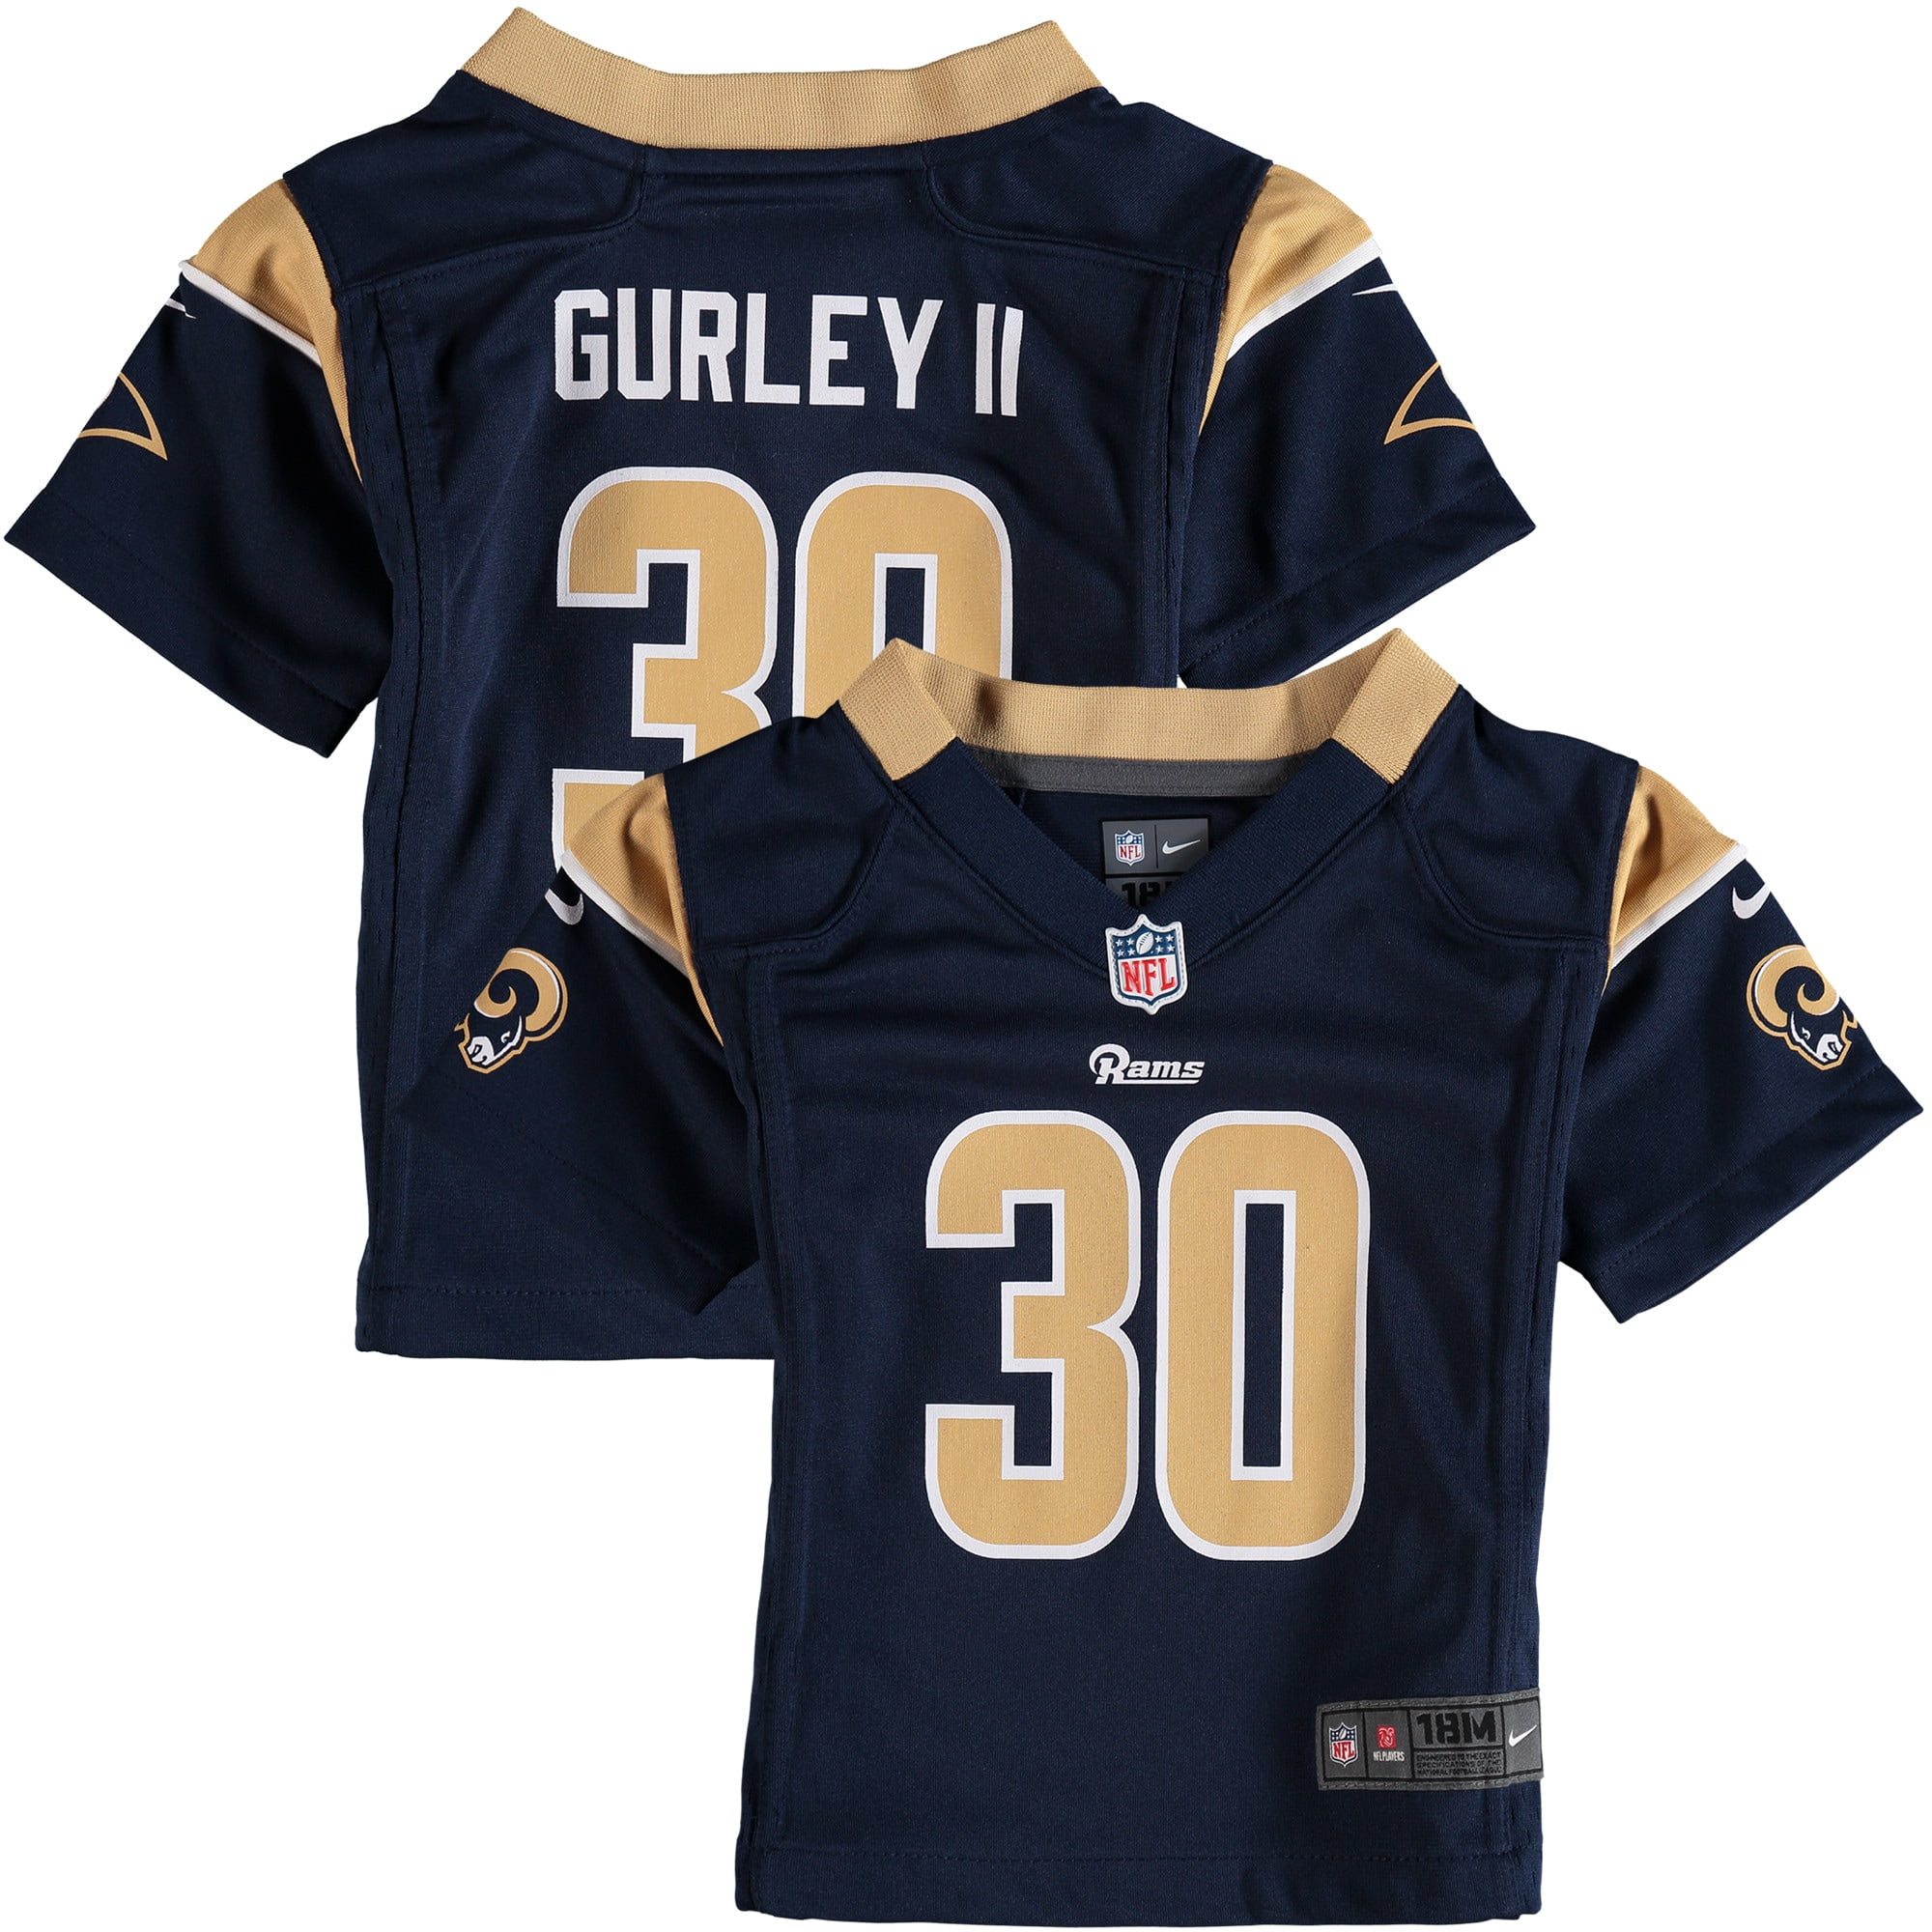 todd gurley jersey number